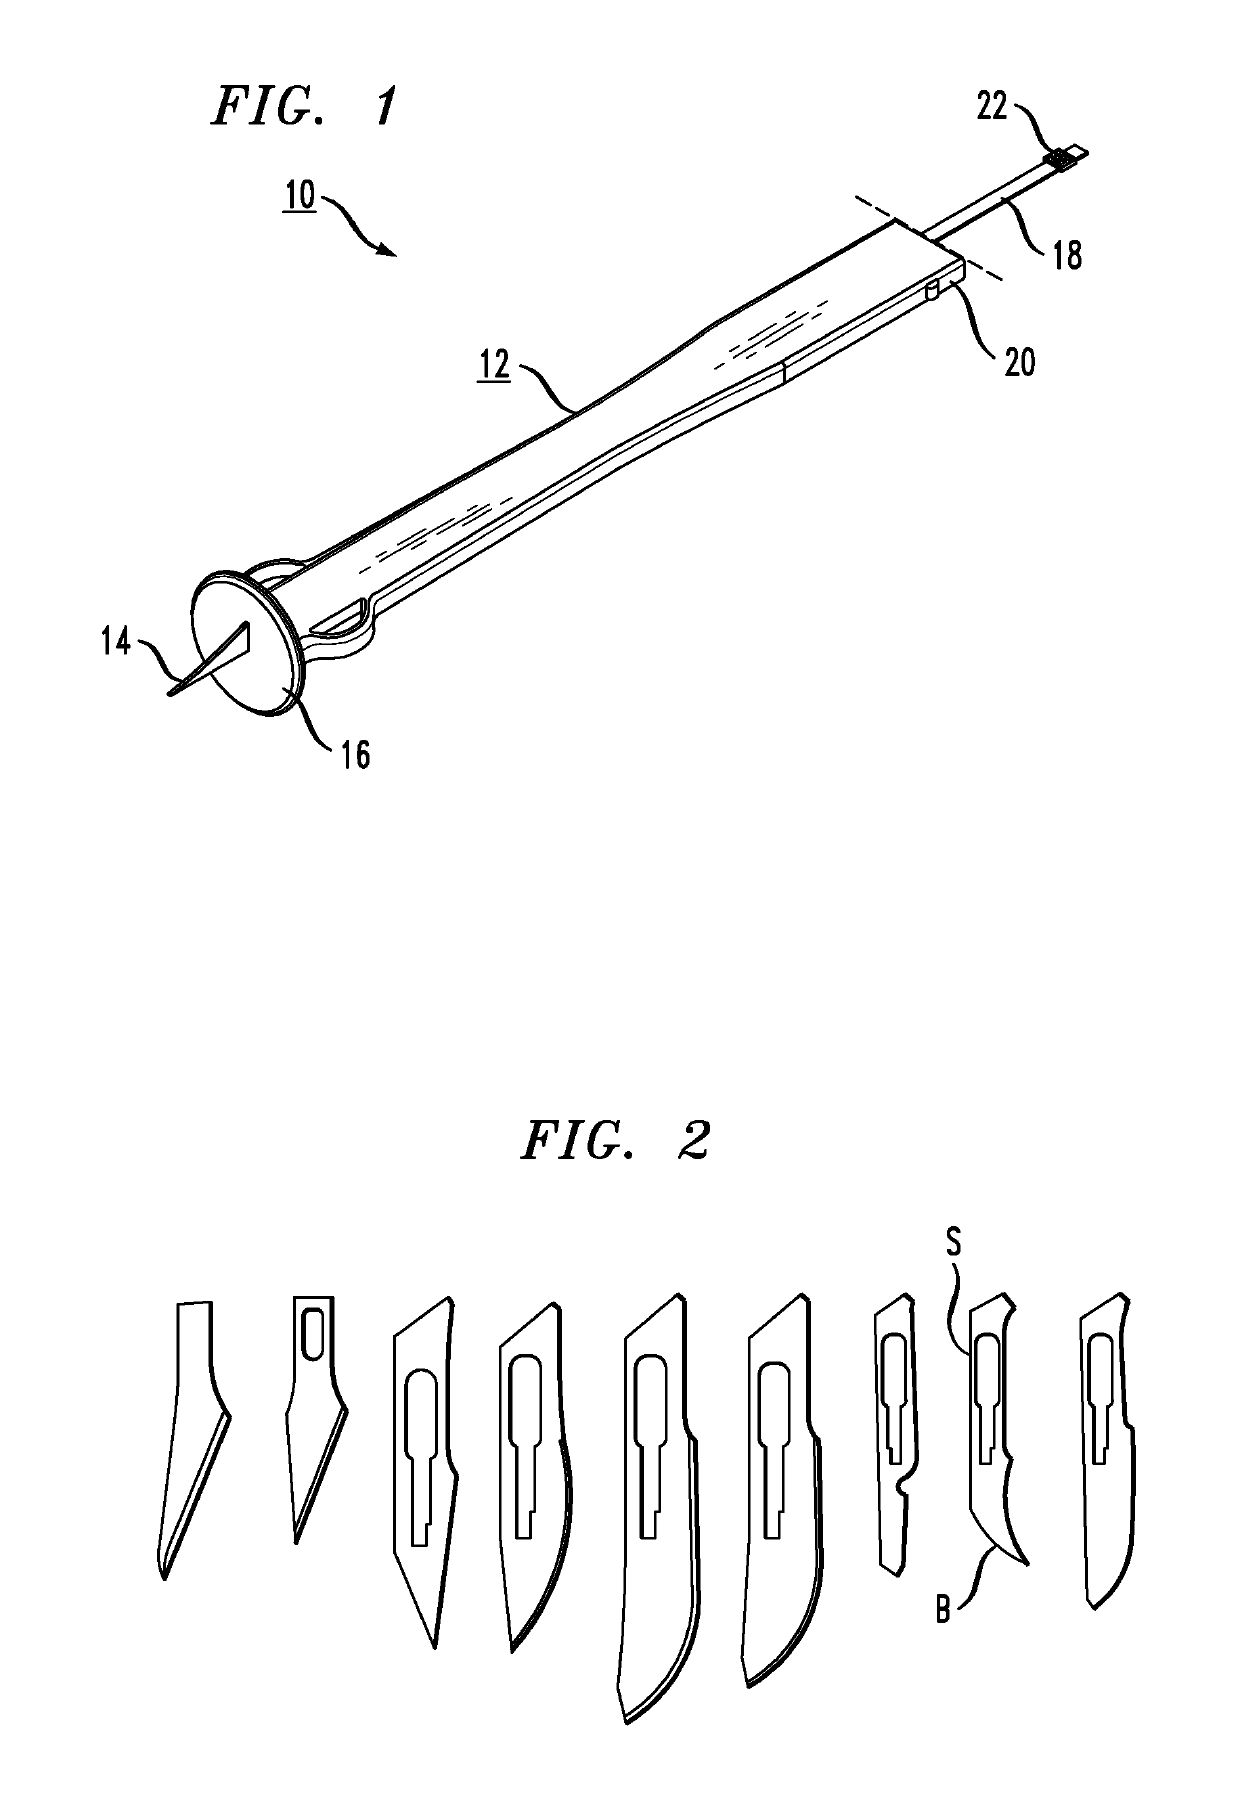 Device for obtaining small, precise volumes of fluid from animals